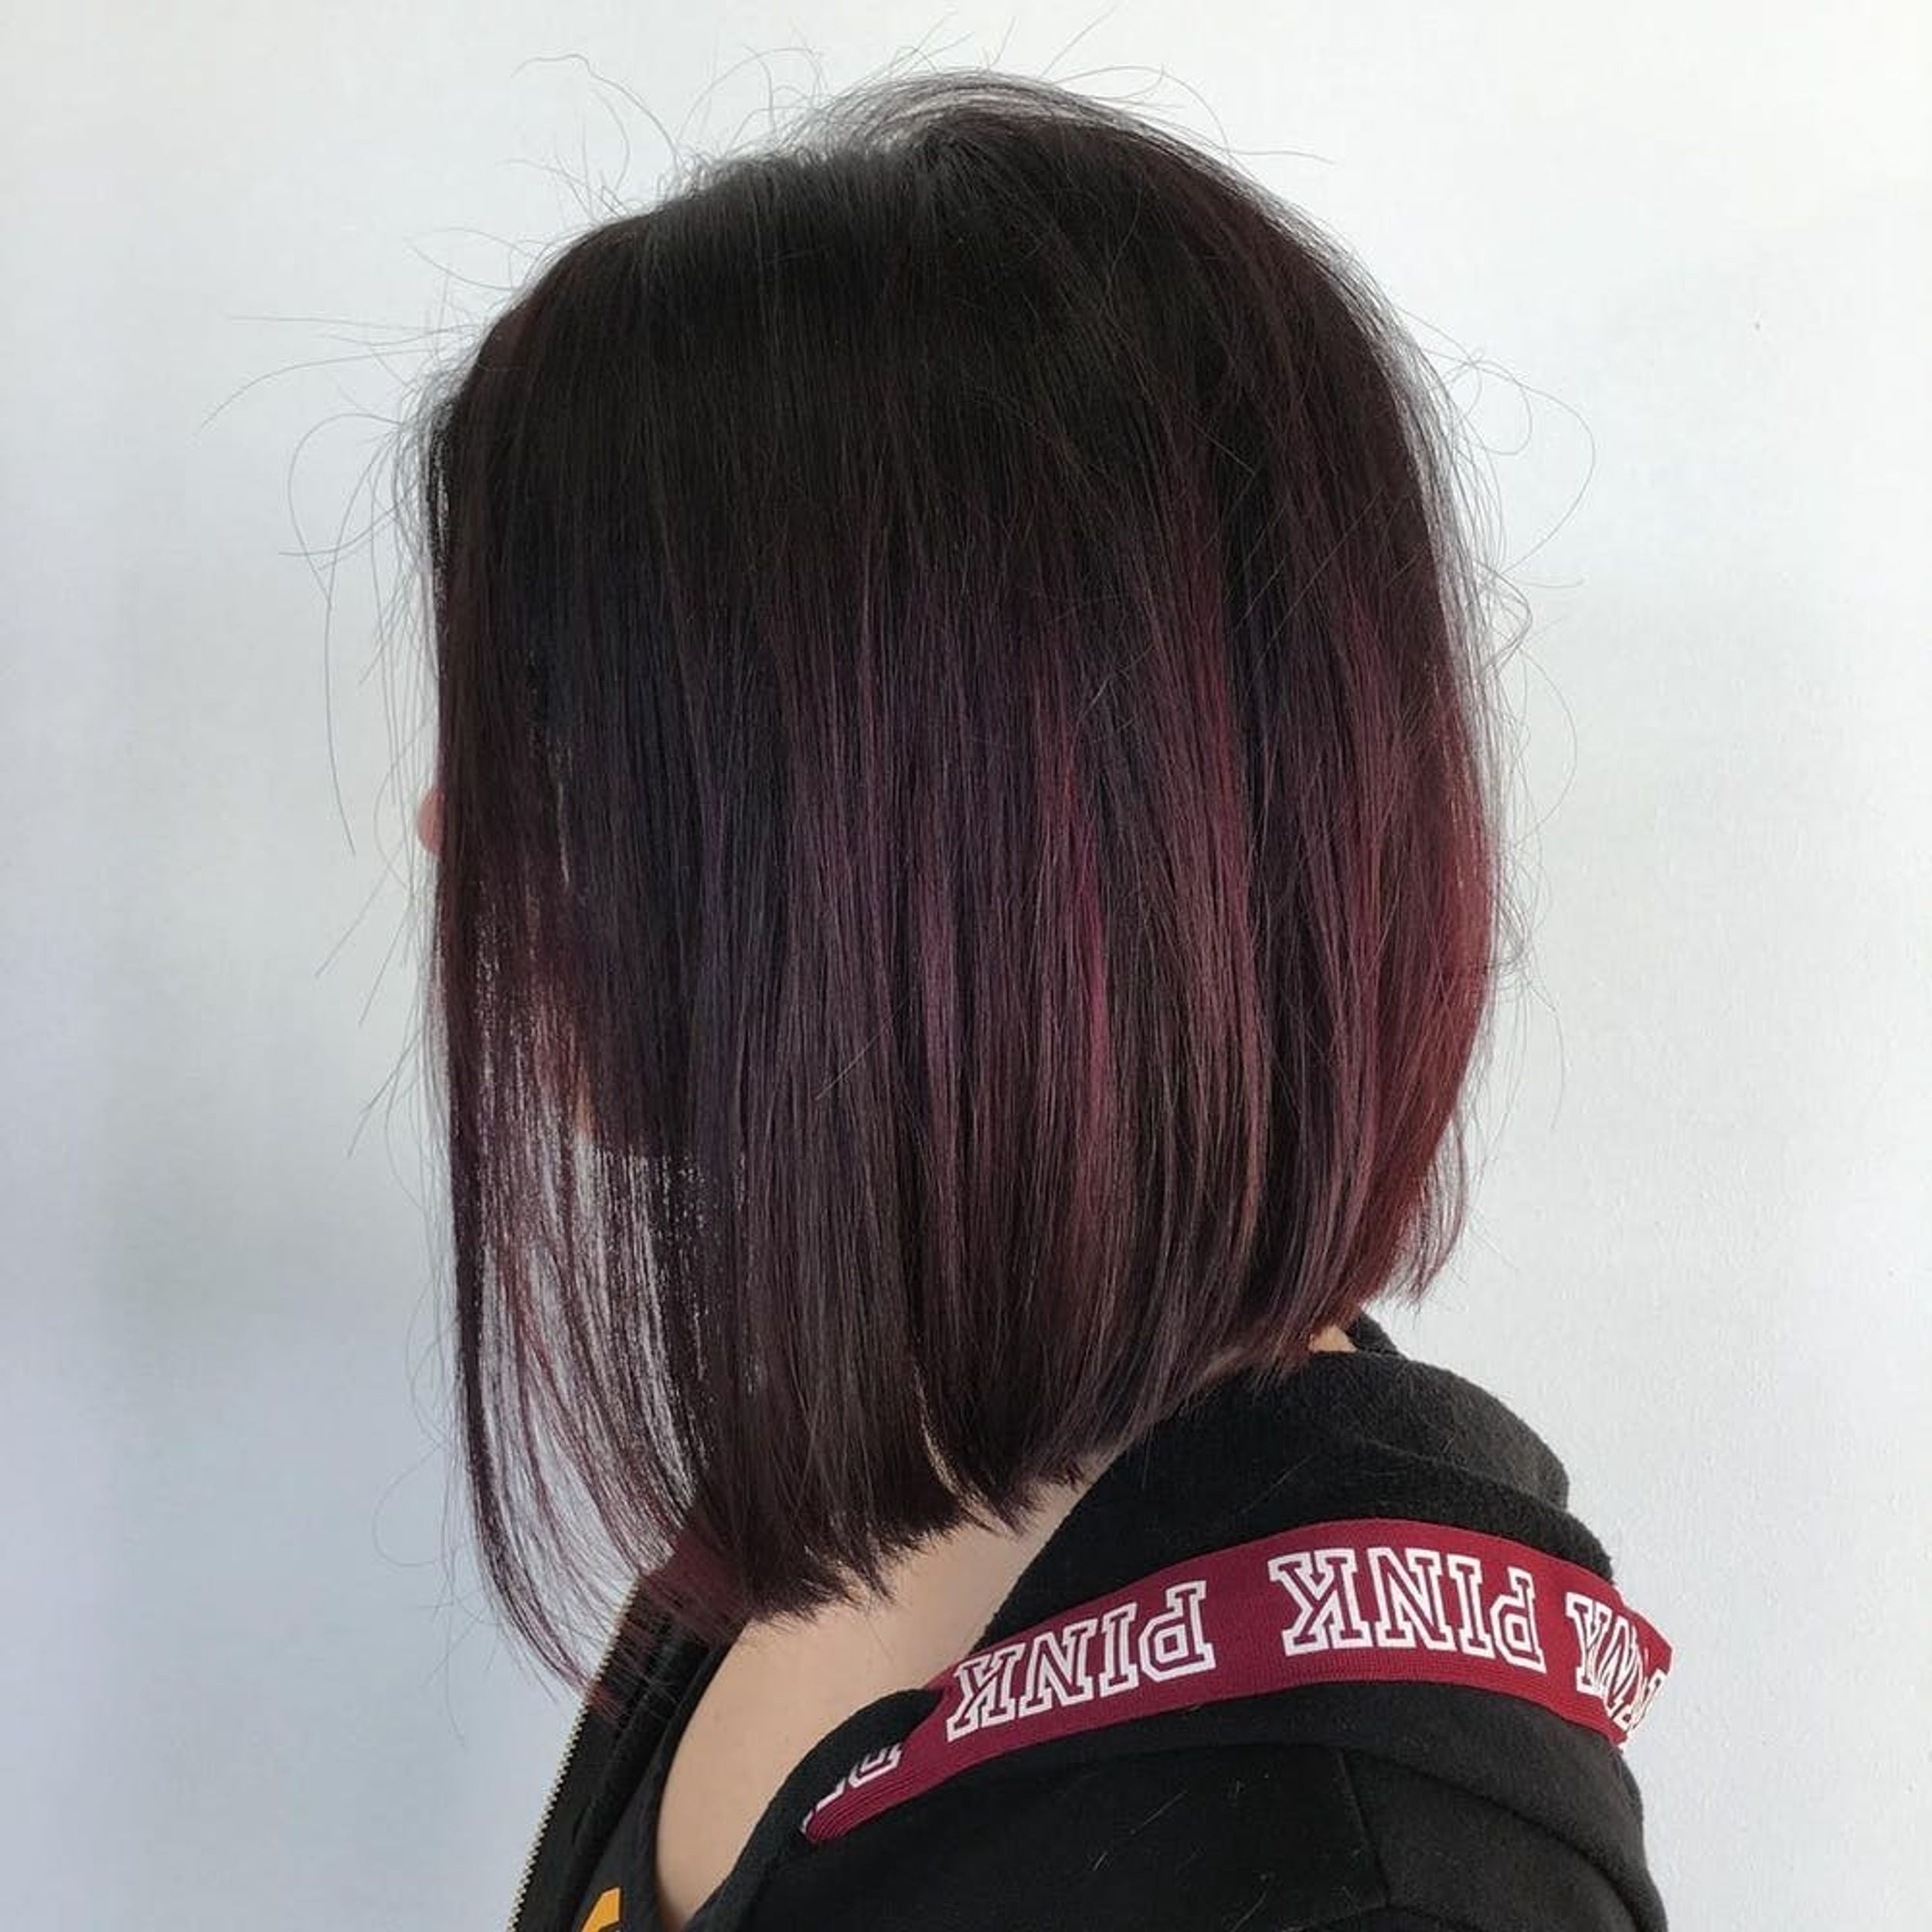 11 Mulled Wine Hair Ideas for Winter 2018